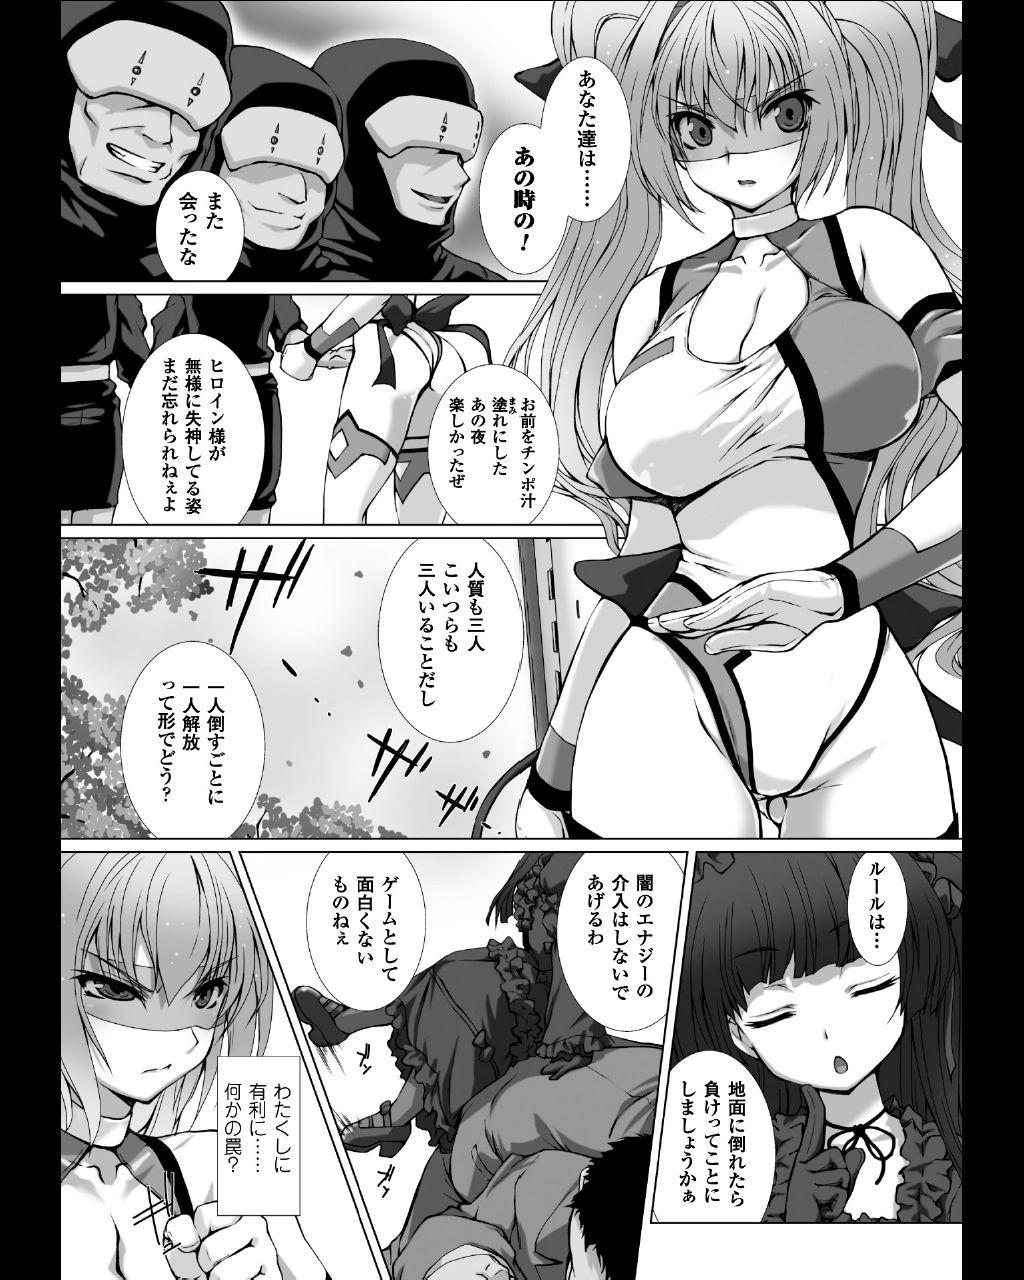 Cum 変幻装姫シャインミラージュ THE COMIC EPISODE 4 Awesome - Page 8